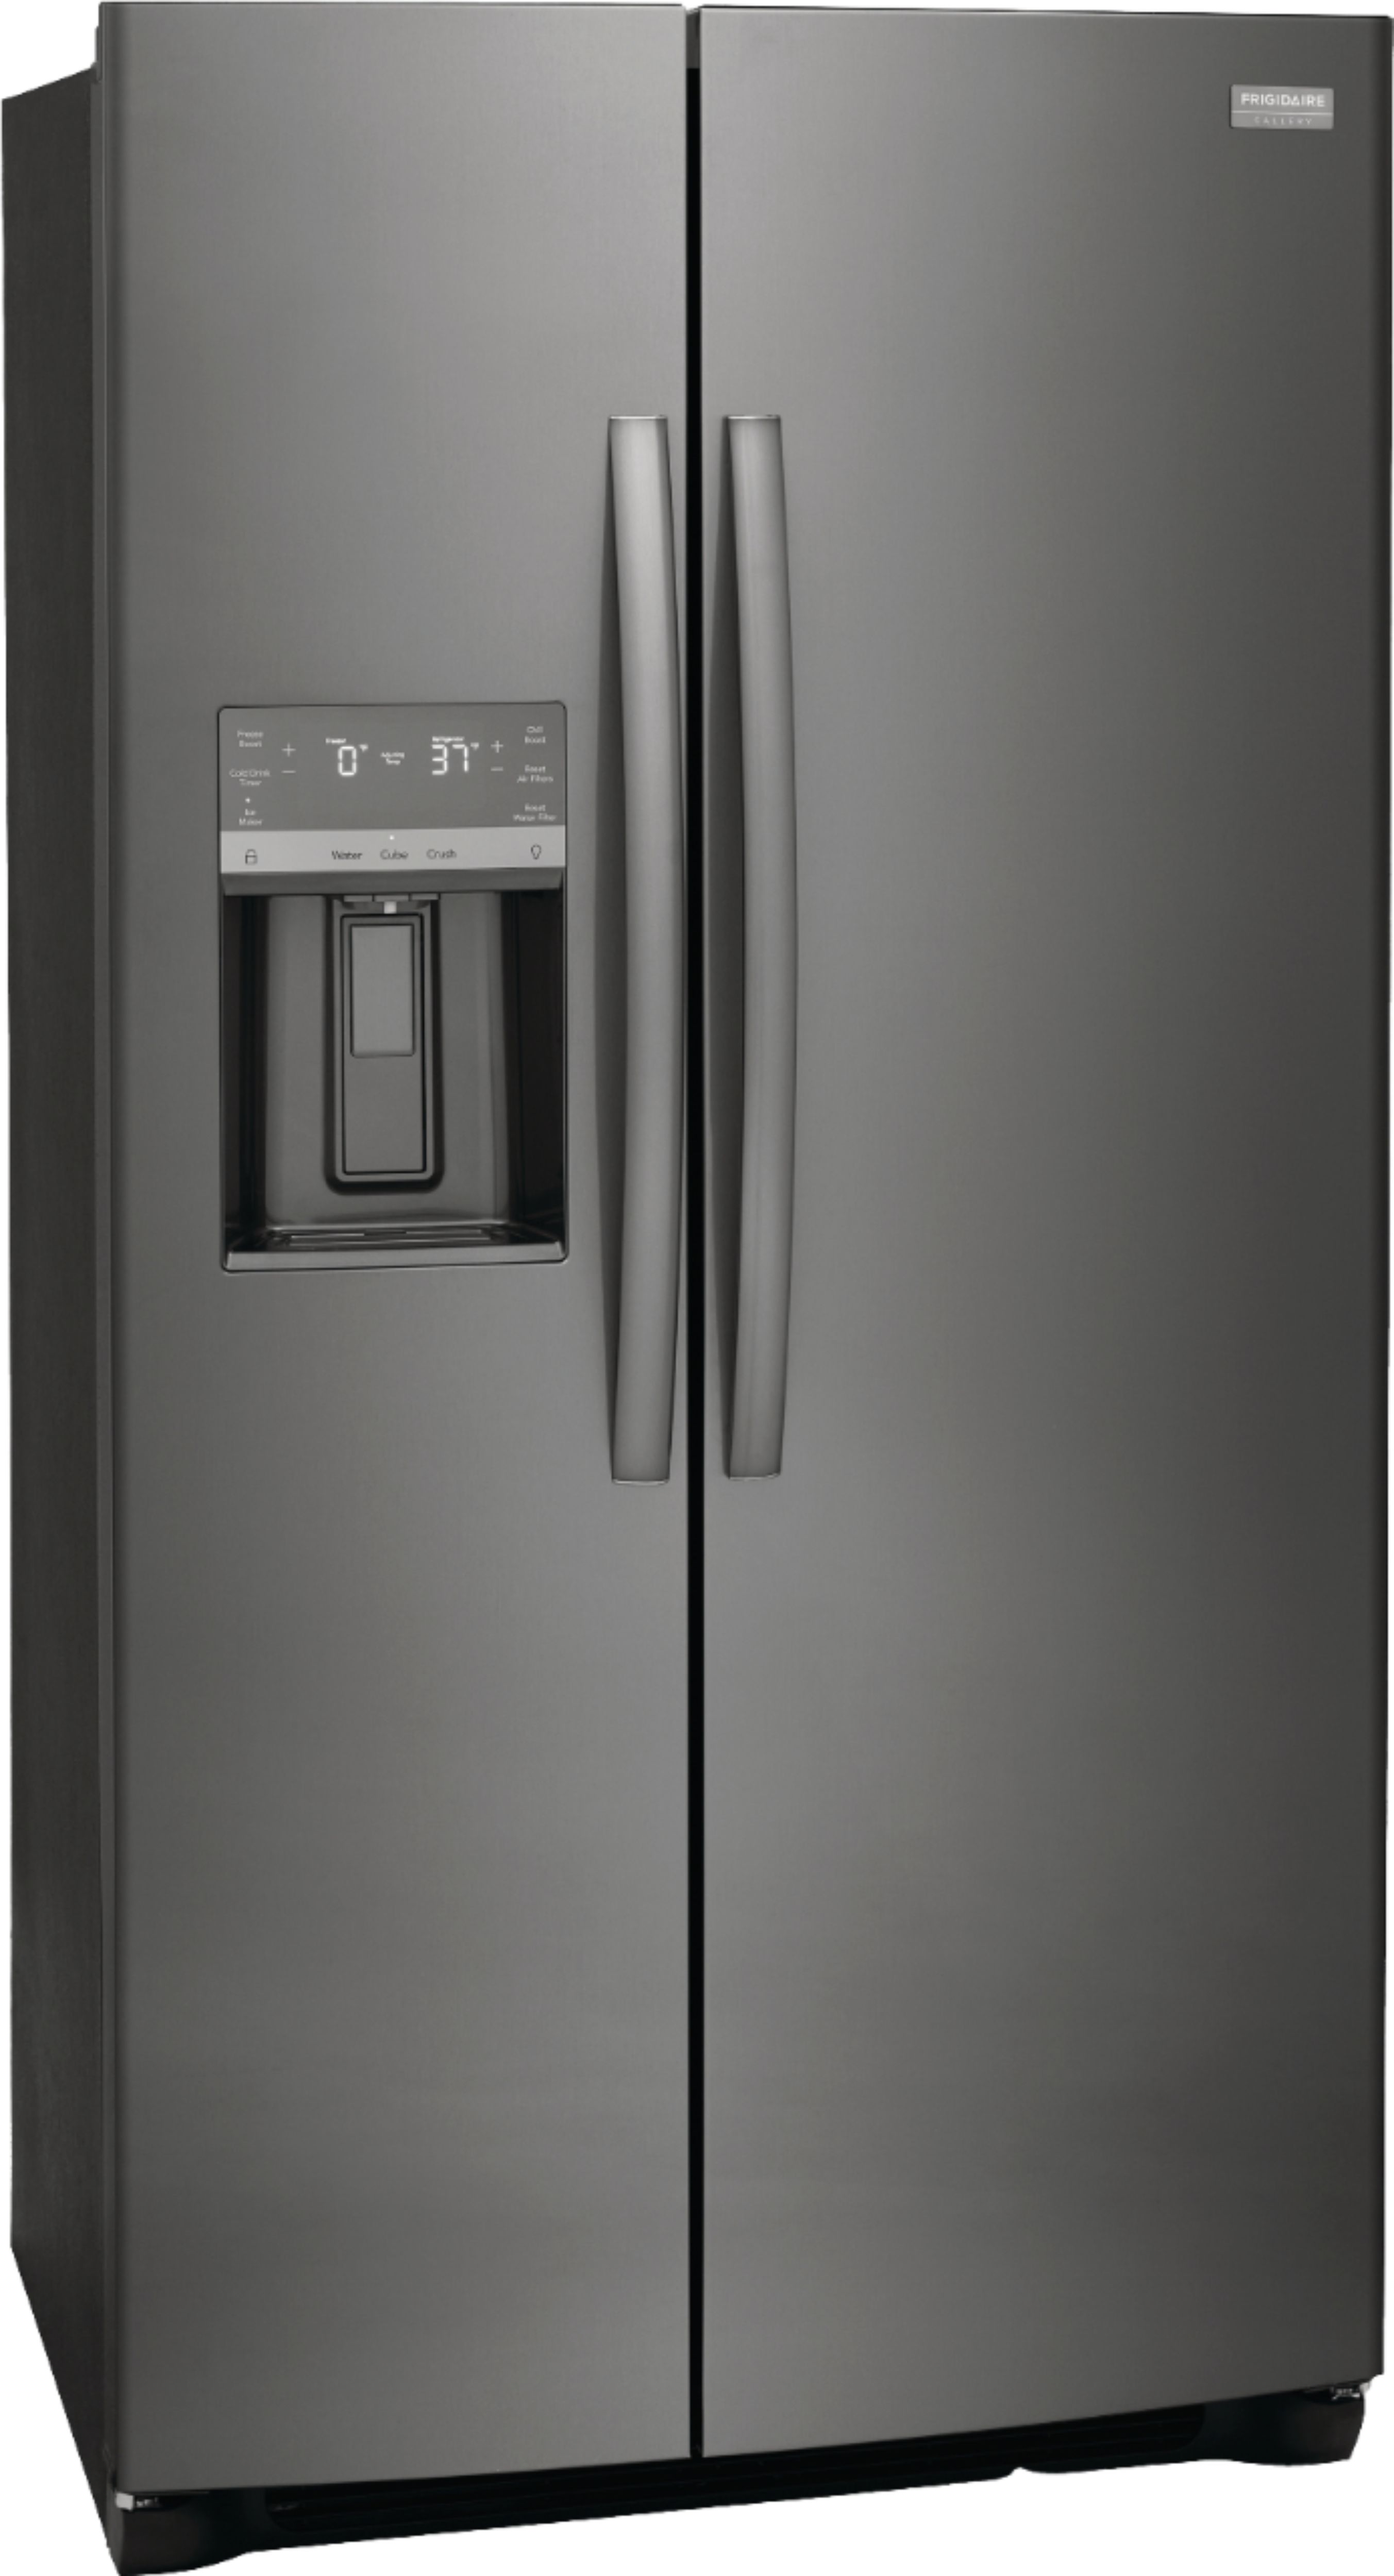 Left View: Frigidaire - Gallery 22.3 Cu. Ft. Side-by-Side Counter-Depth Refrigerator - Black stainless steel